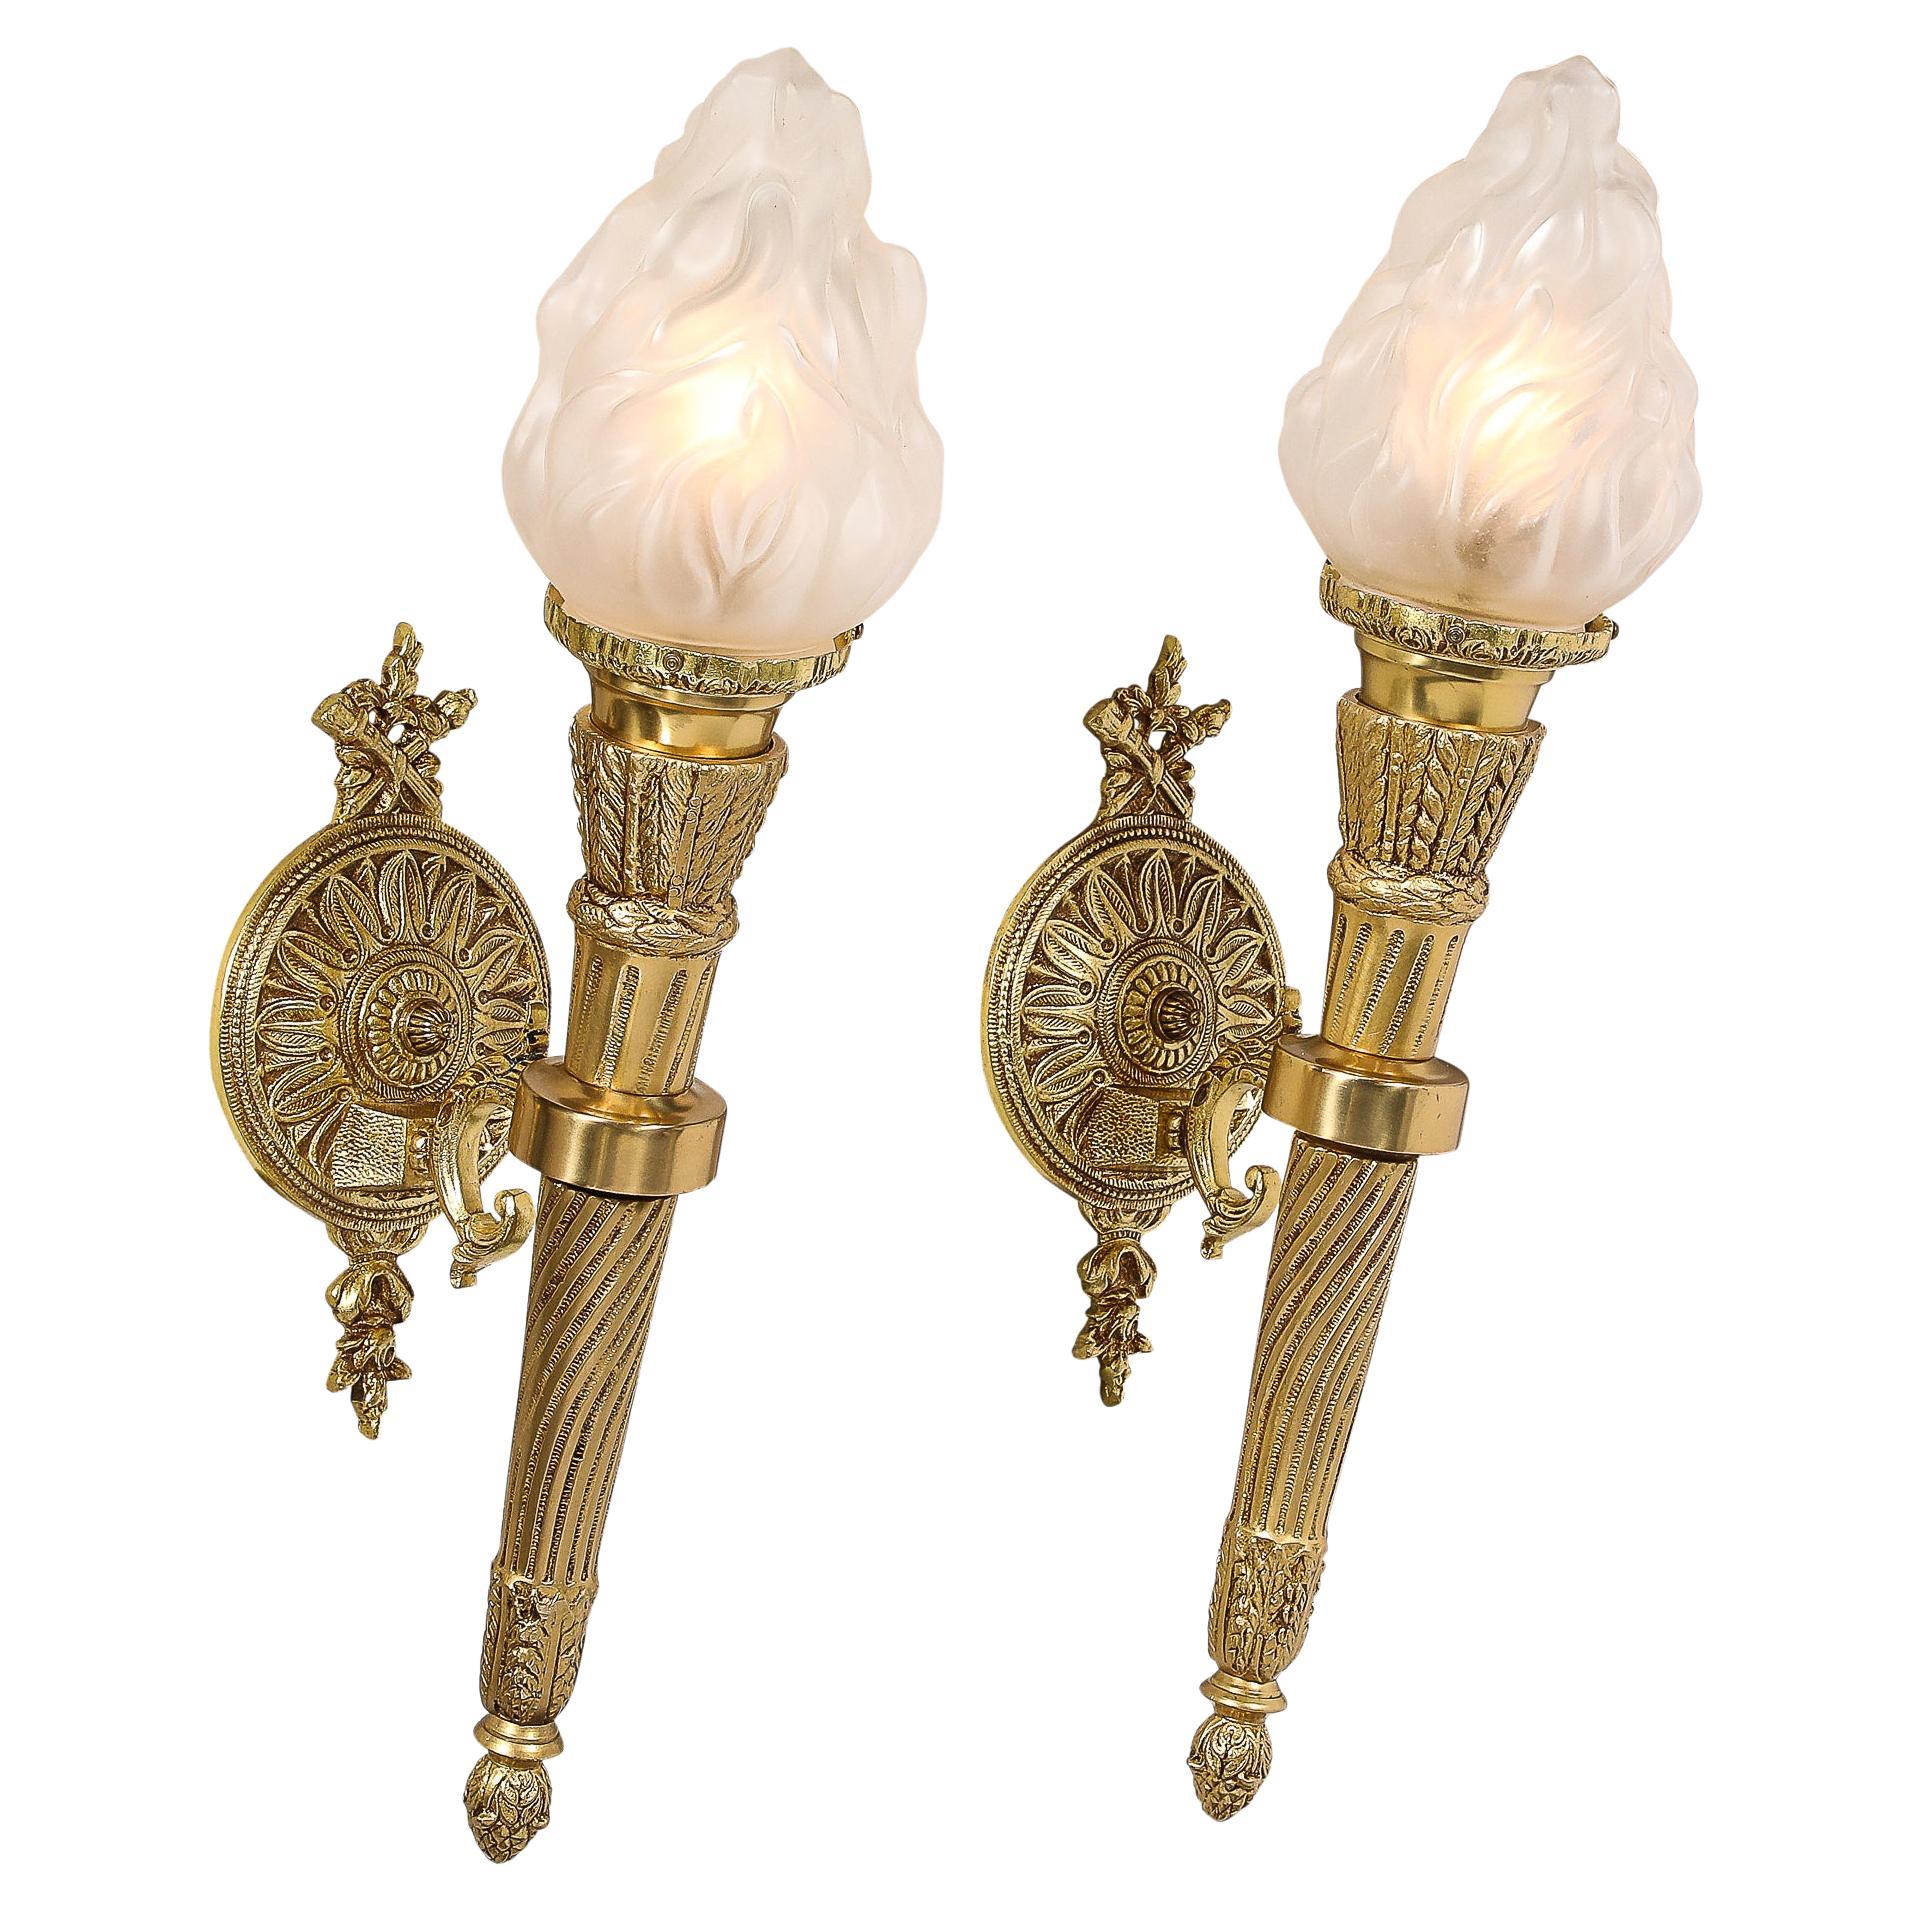 Pair of Neoclassical Torch Sconces in Frosted Glass and Antique  Brass